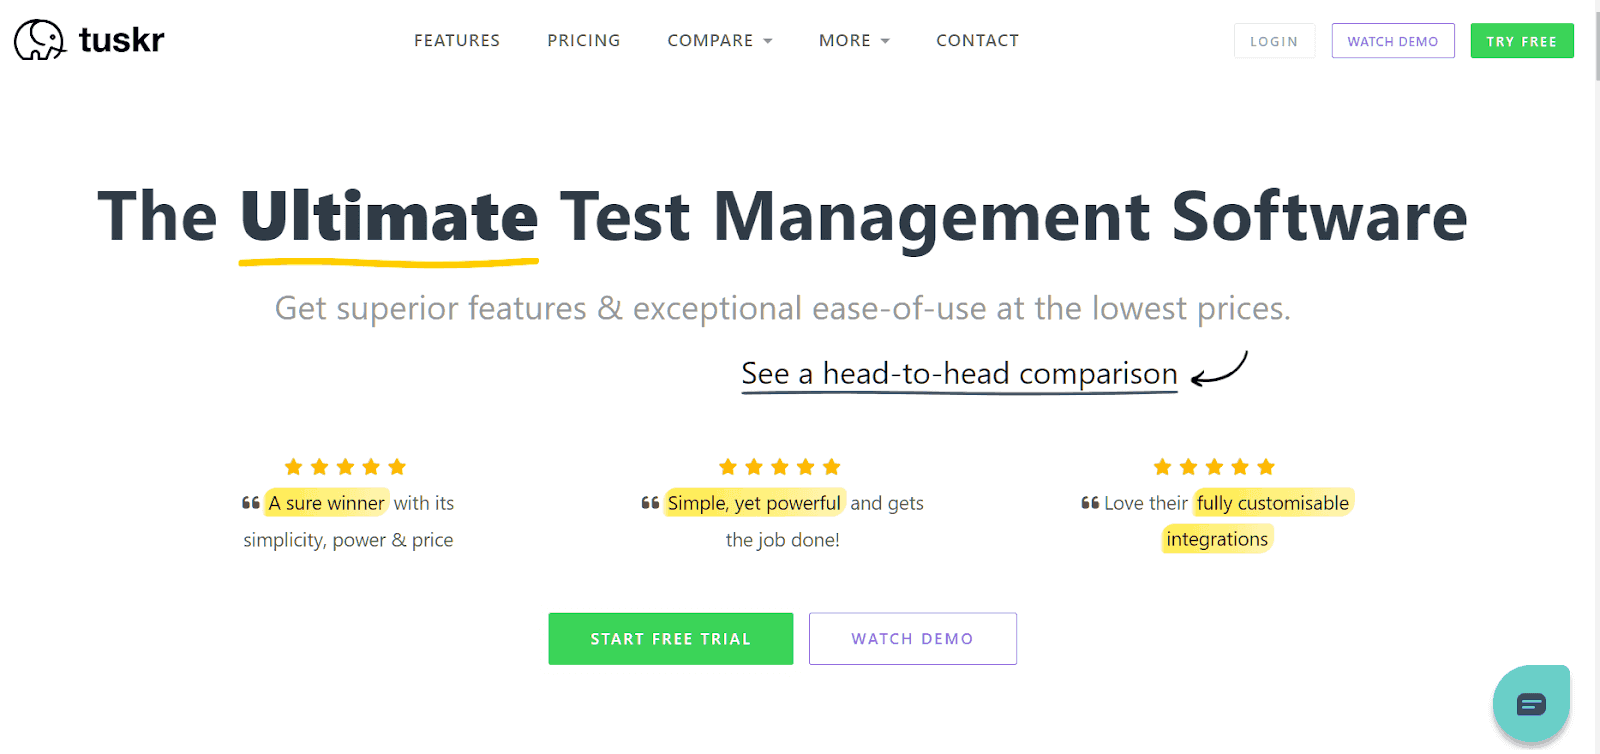 Tuskr is a user-friendly, cloud-based, free test management tool